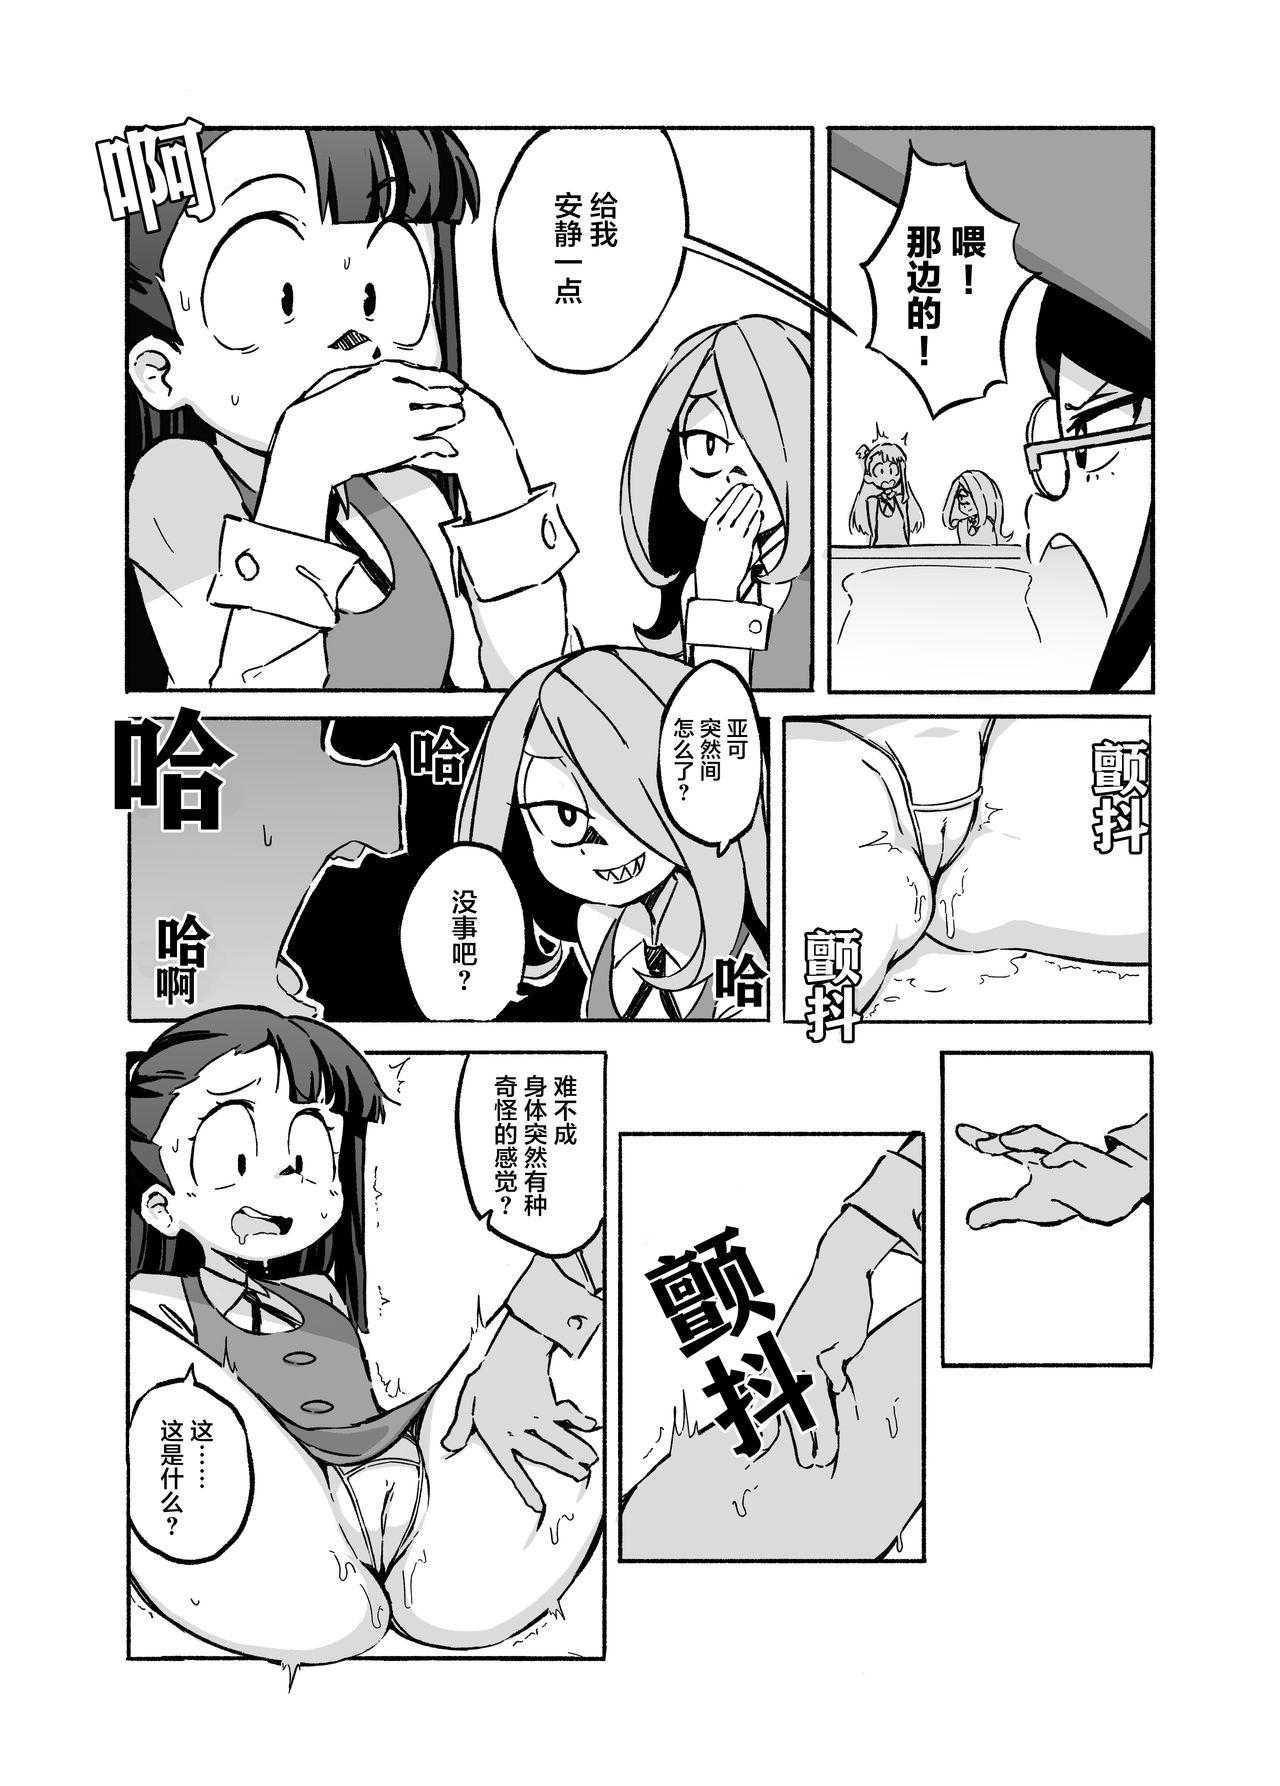 Arab Mushroom Fever - Little witch academia Hot Girl Porn - Page 9